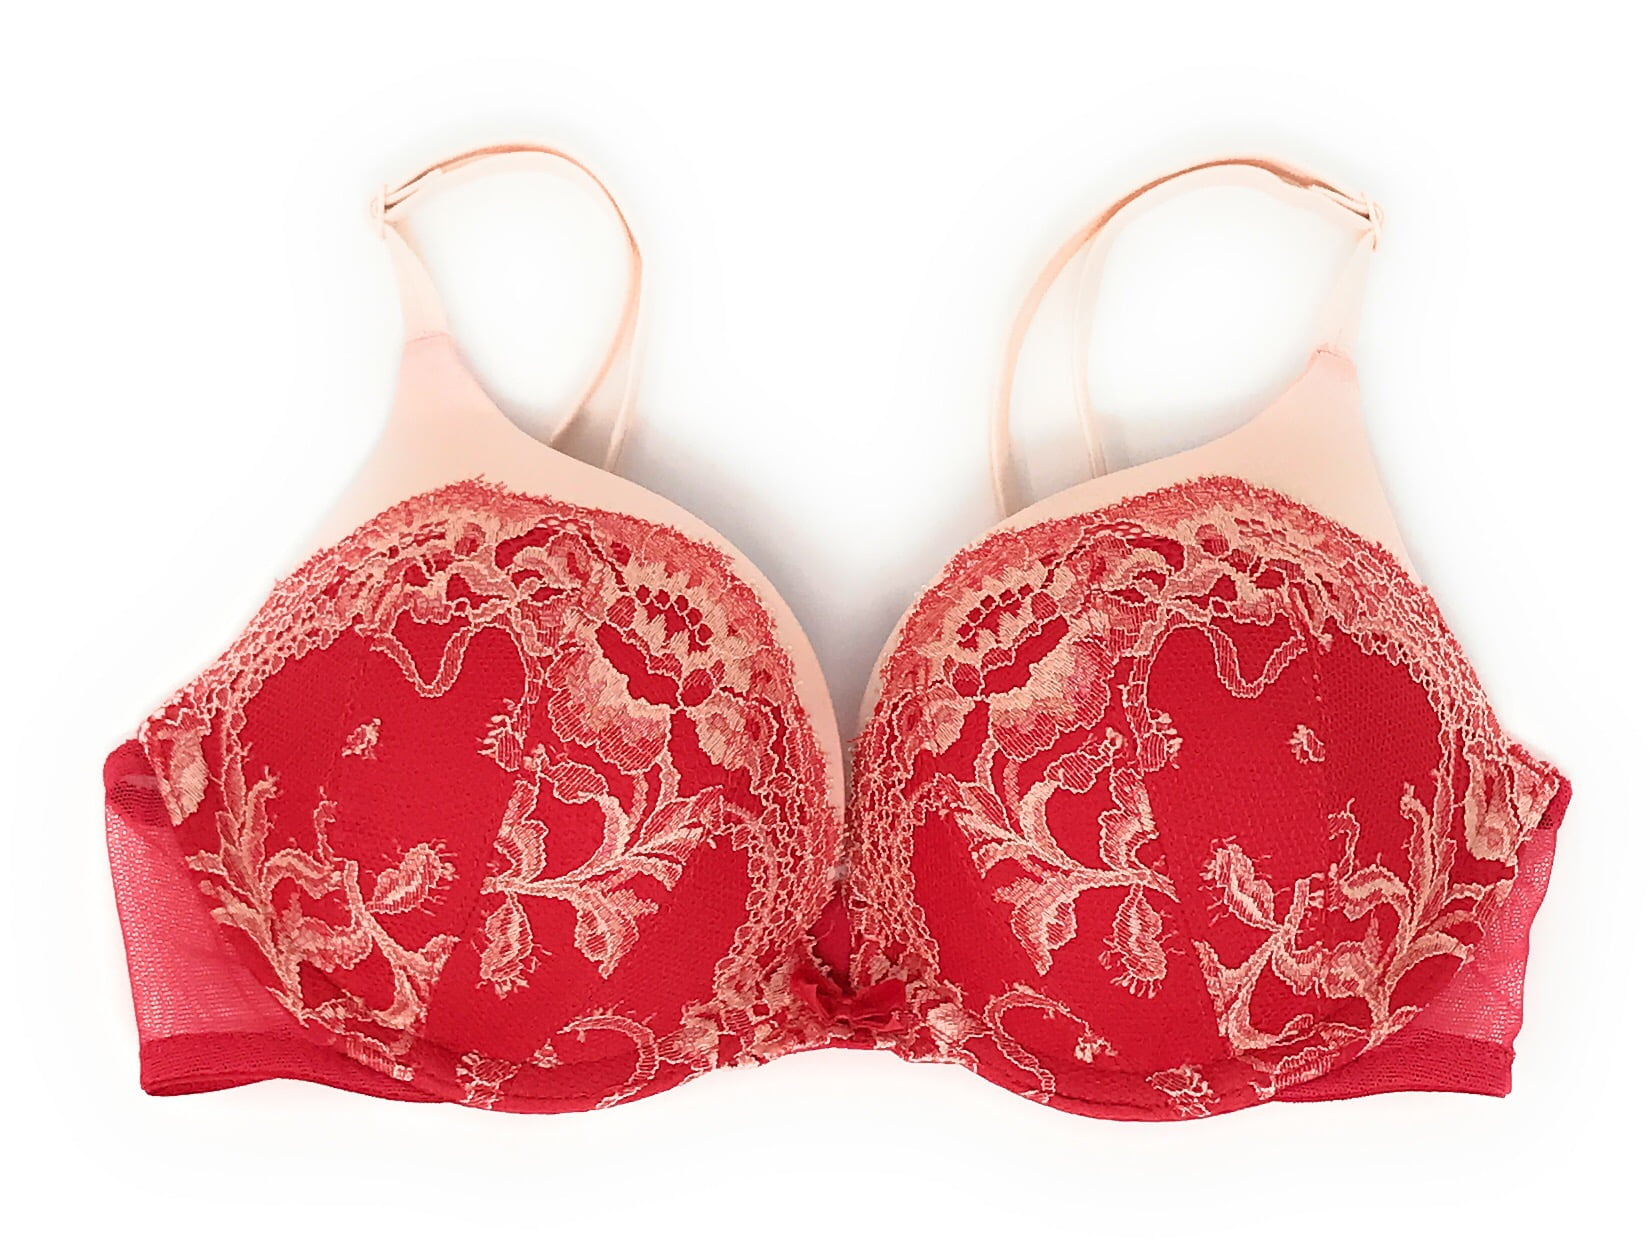 Victoria's Secret Bombshell Bra Red - $30 (64% Off Retail) - From